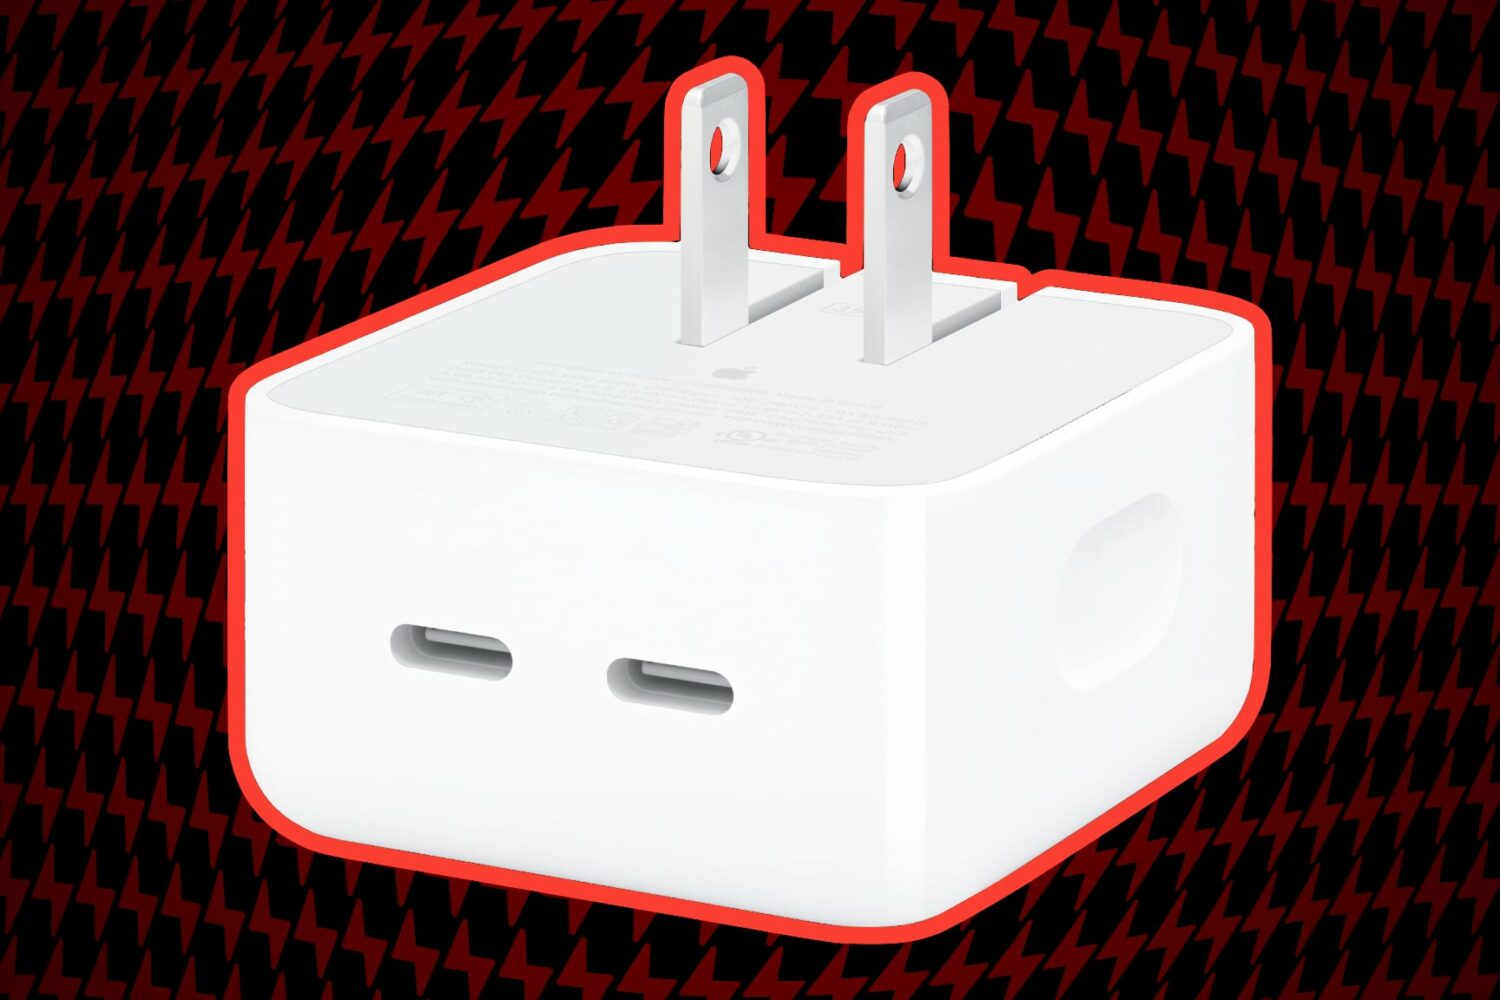 The compact version of Apple's 35-watt power adapter comes with two USB-C ports but cannot be paired with the company's World Travel Adapter Kit